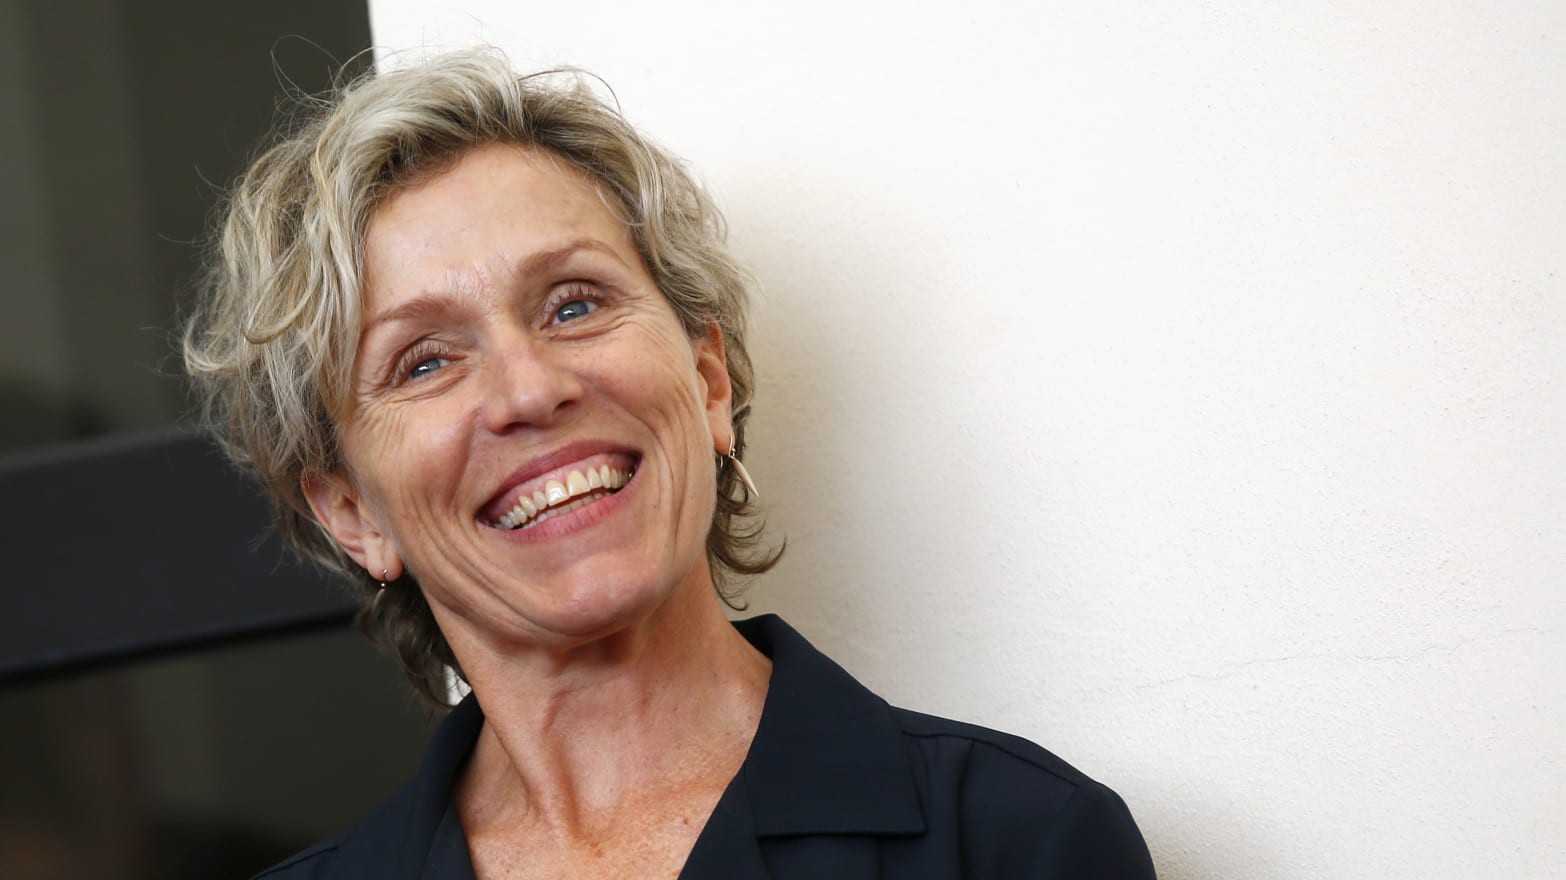 American actress and film producer, Frances McDormand